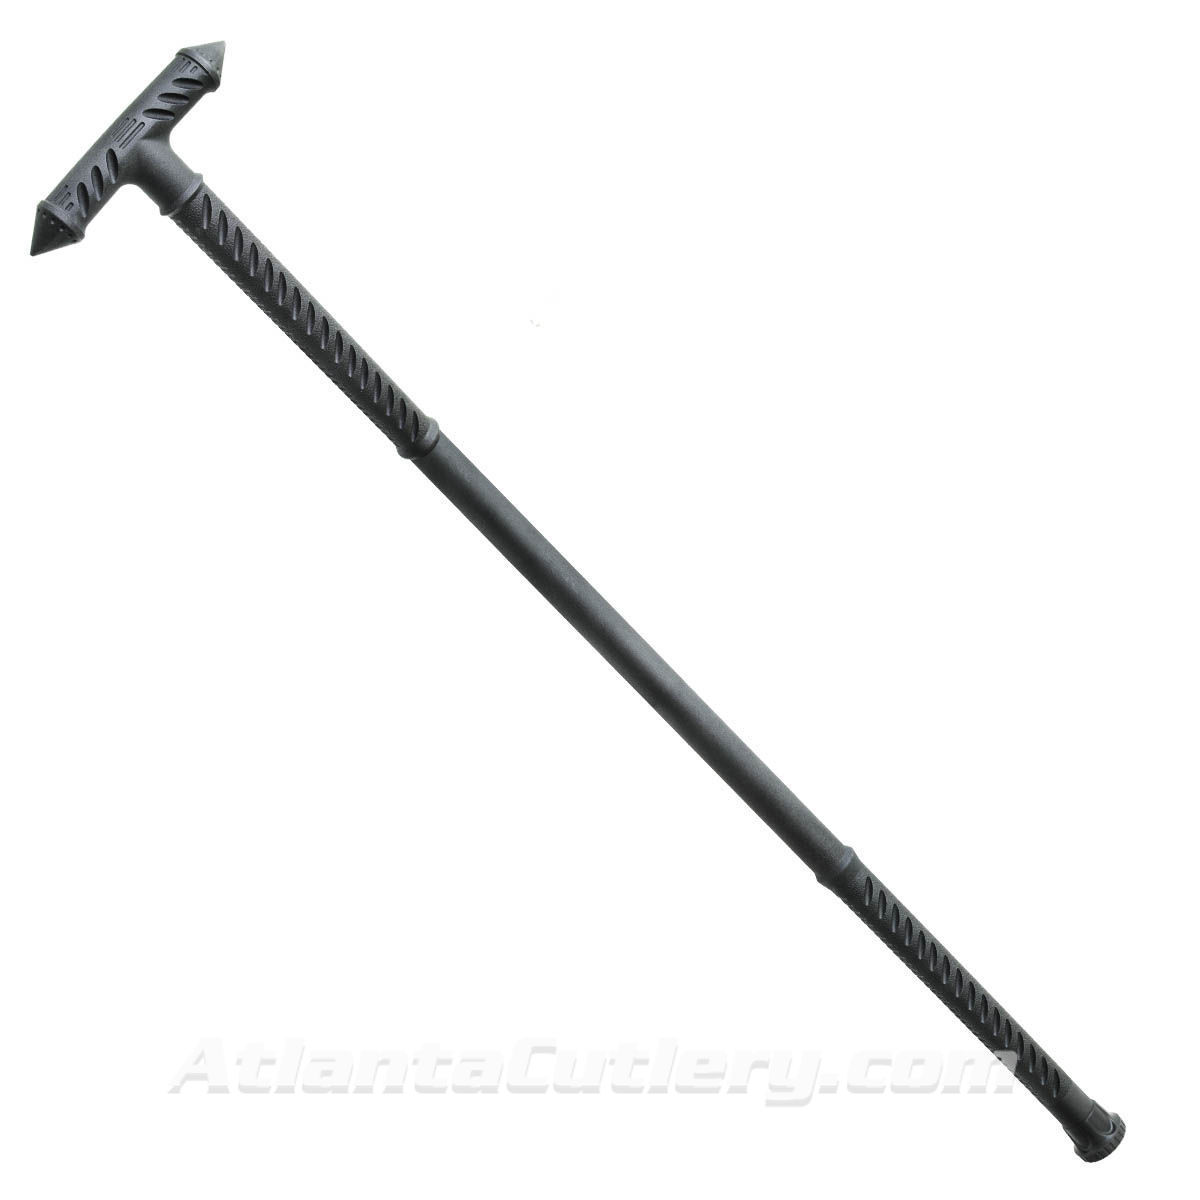 Night Watchman Survival Staff Walking Cane made in injection-molded nylon